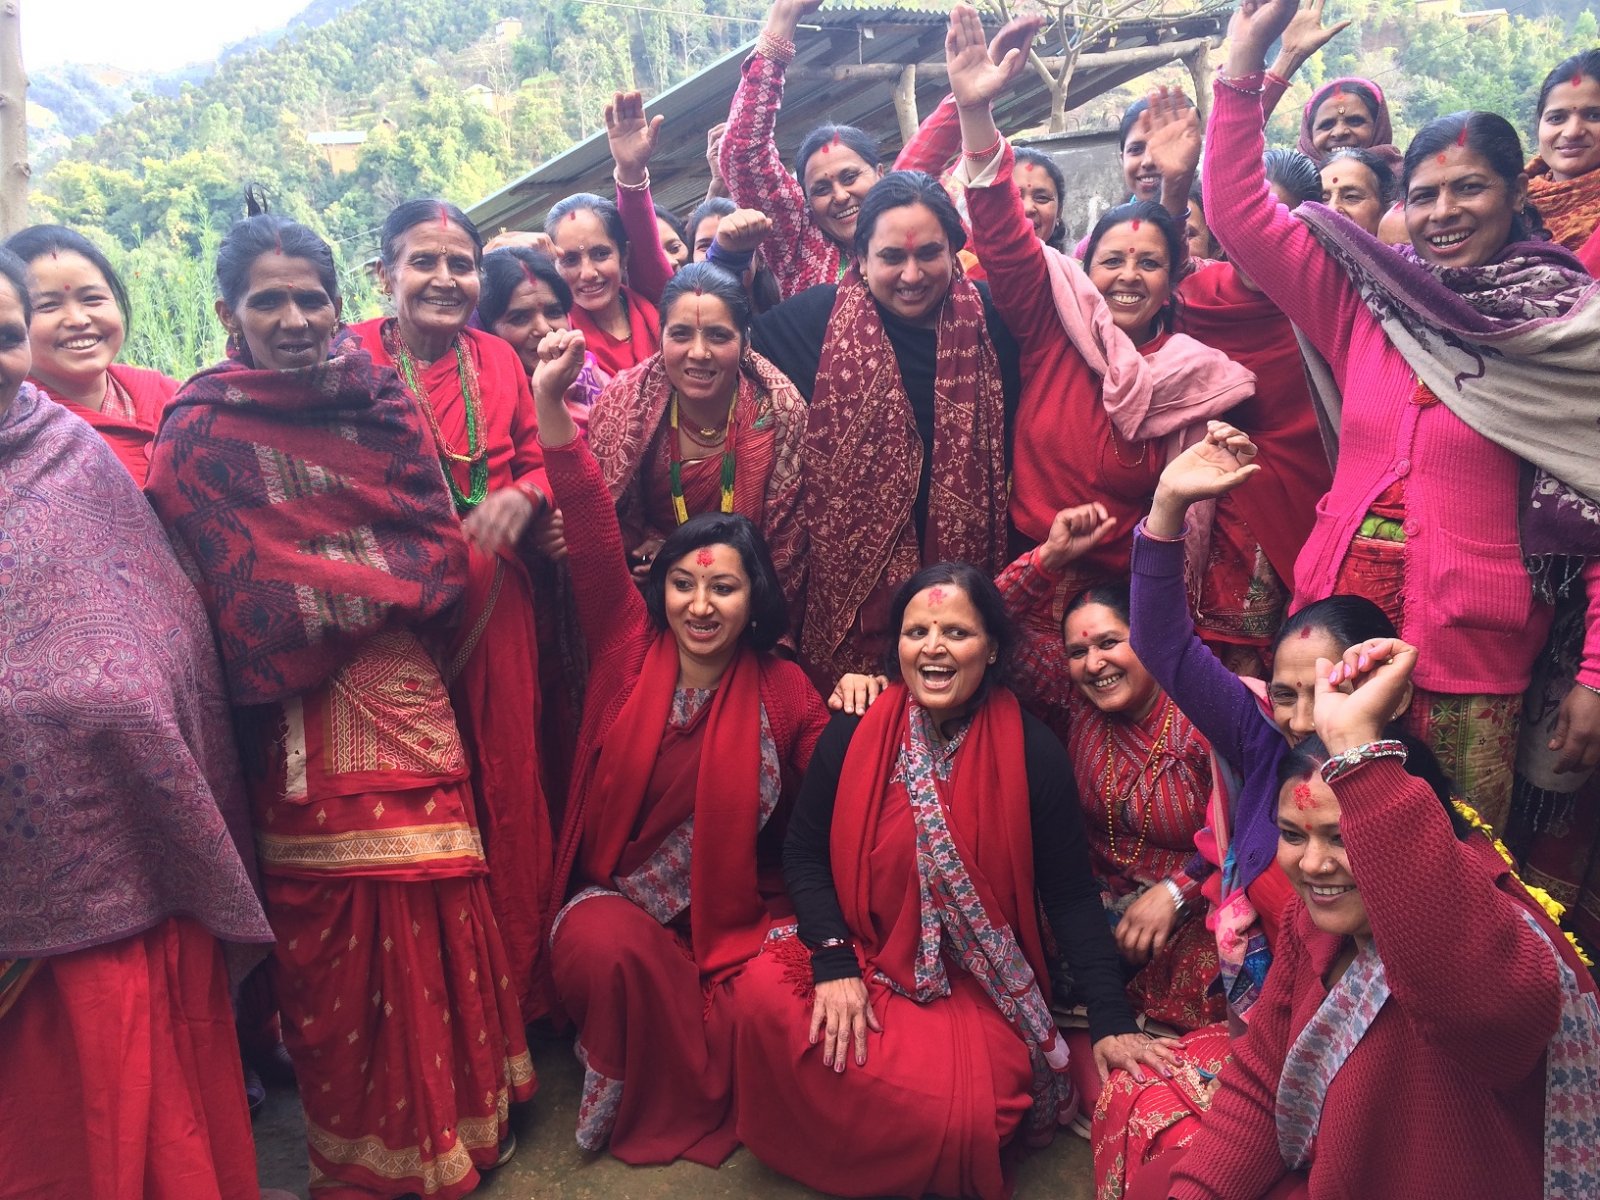 Women Awareness Centre Nepal, shown here in happier days before the earthquake, is now active in community-led disaster responses. Courtesy of International Development Exchange.